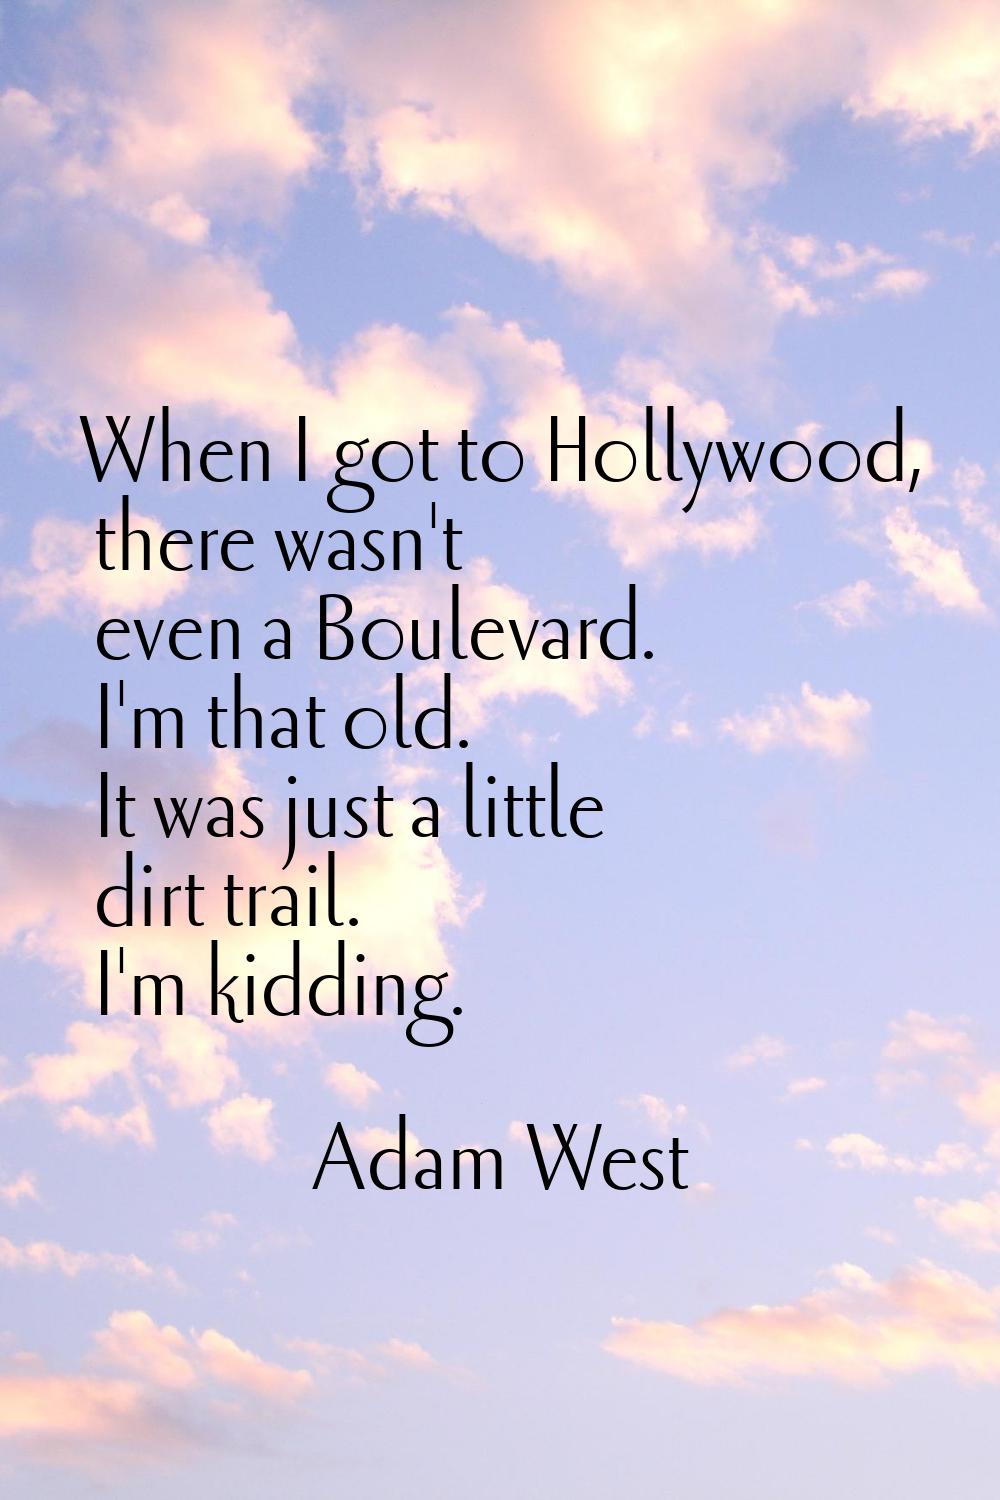 When I got to Hollywood, there wasn't even a Boulevard. I'm that old. It was just a little dirt tra